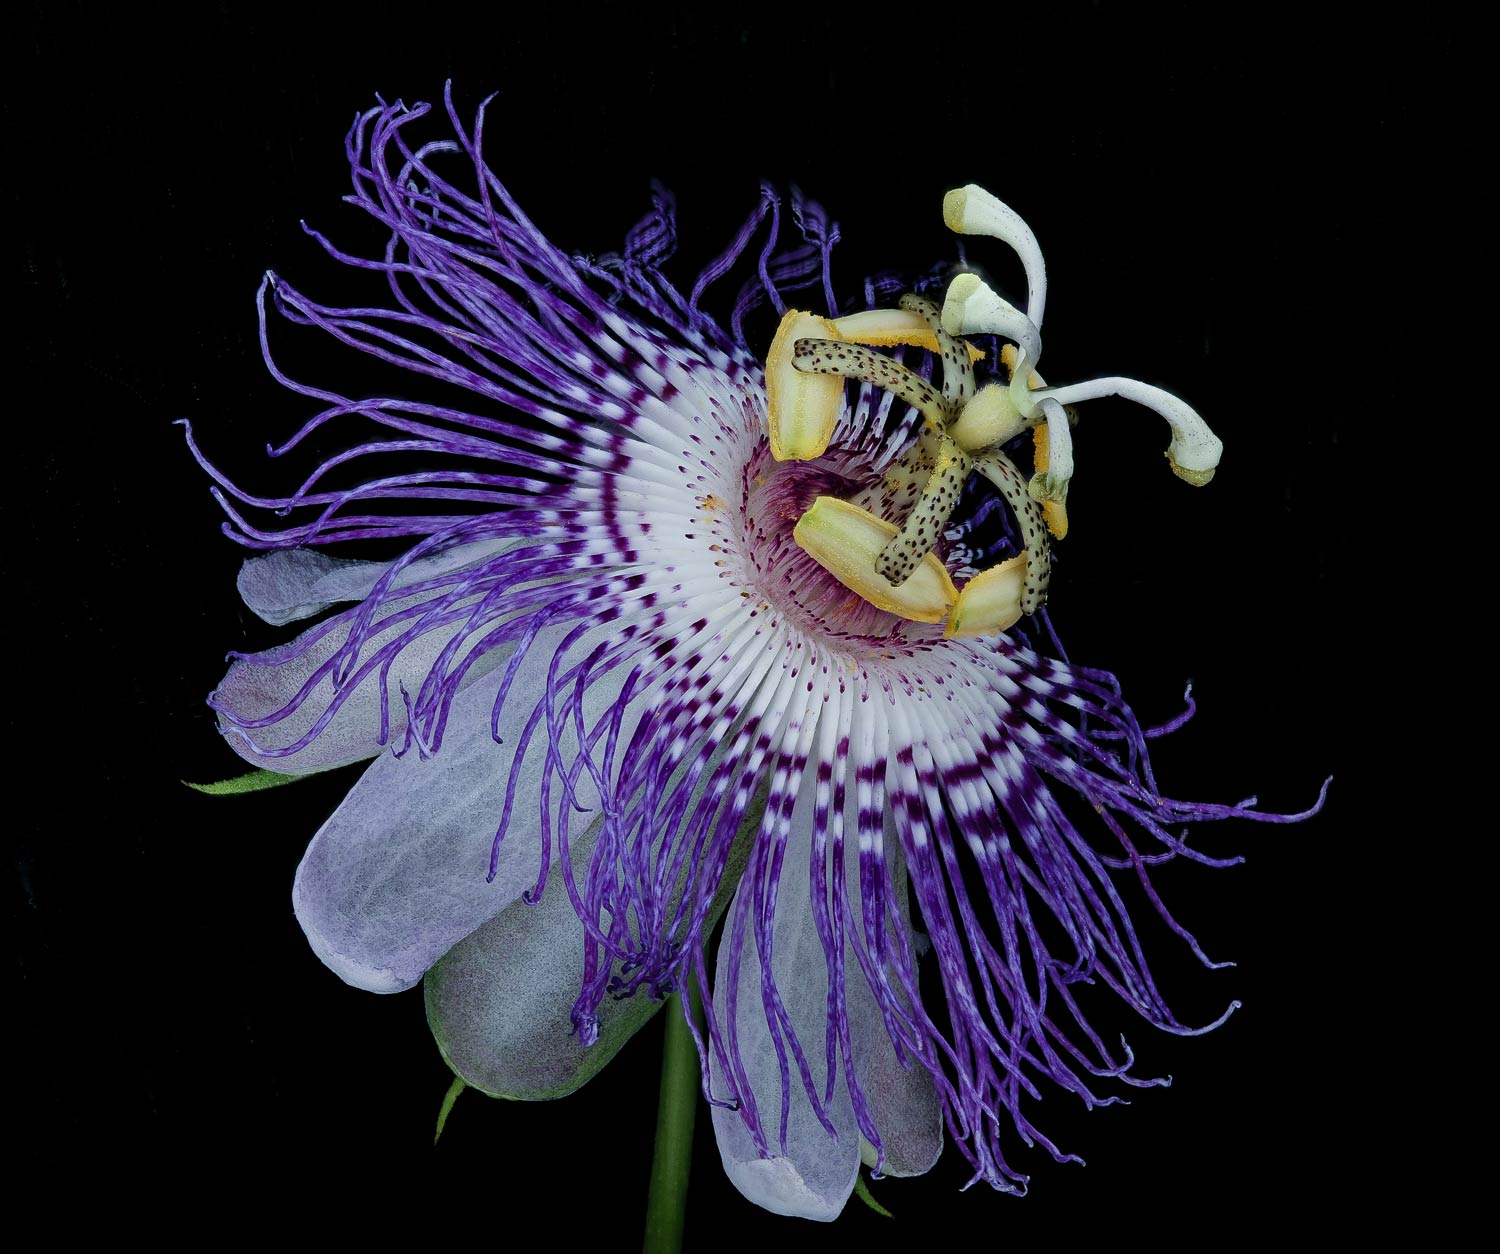 The Carpenter bee flower. This is one of the passion flowers, Passiflora Incarnata, designed to be pollinated by Carpenter bees, which fit right in and are daubed by pollen